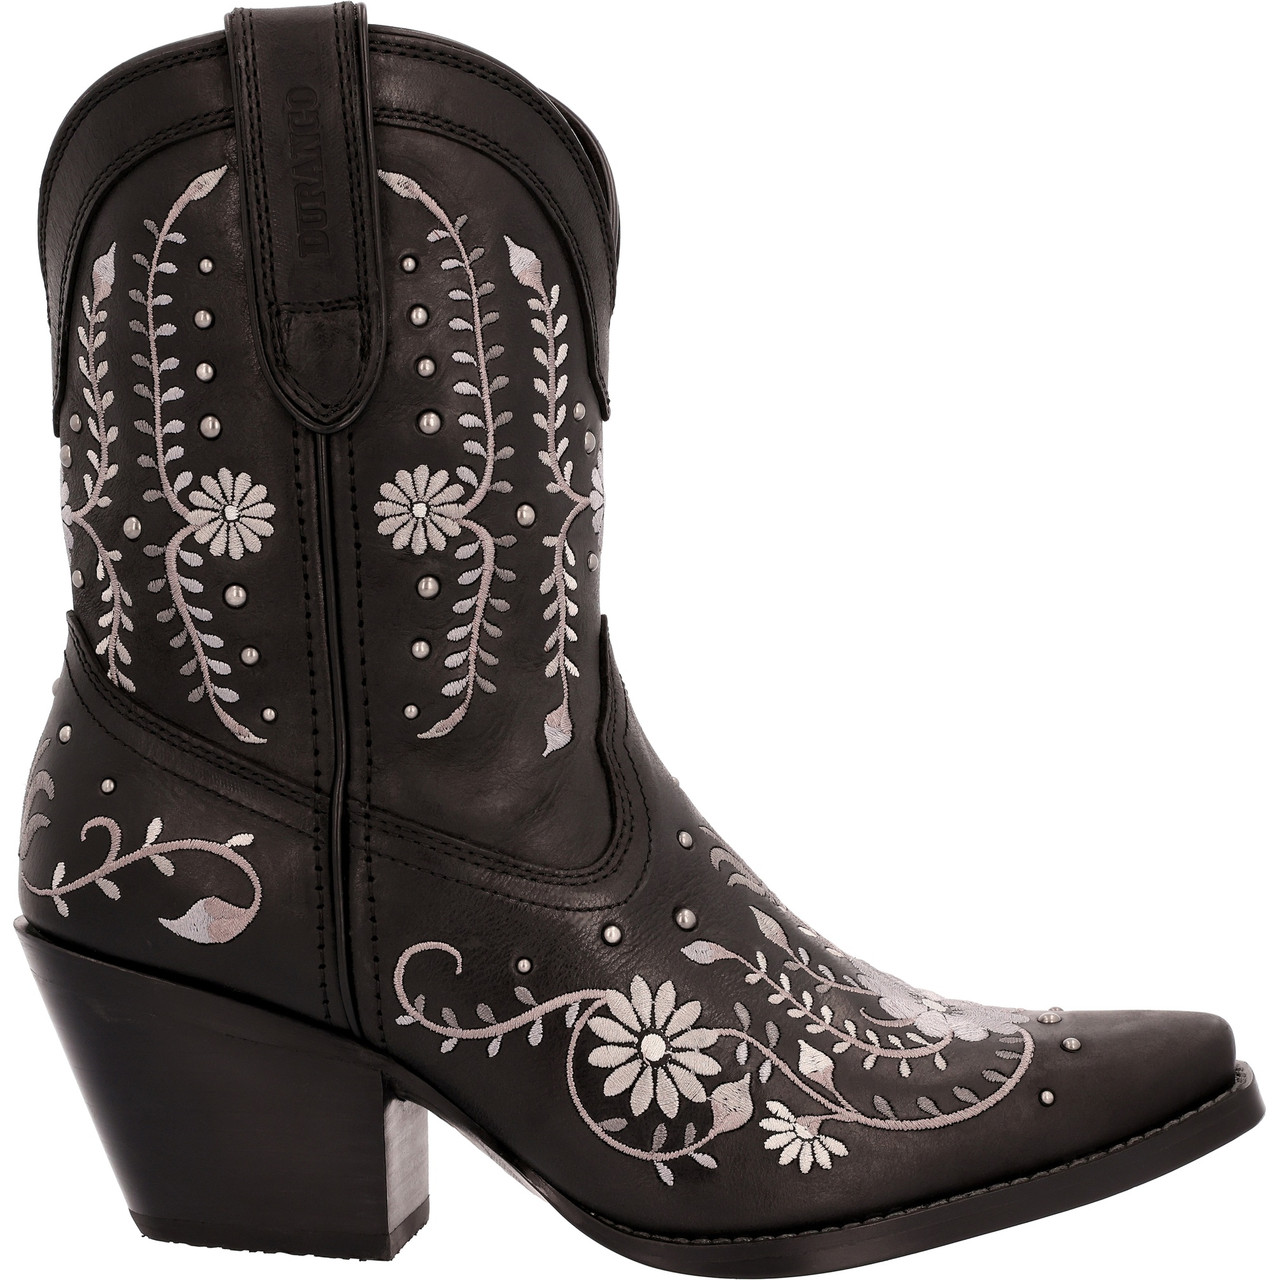 CRUSH™ BY DURANGO® WOMEN’S STERLING WILDFLOWER WESTERN BOOTS DRD0441